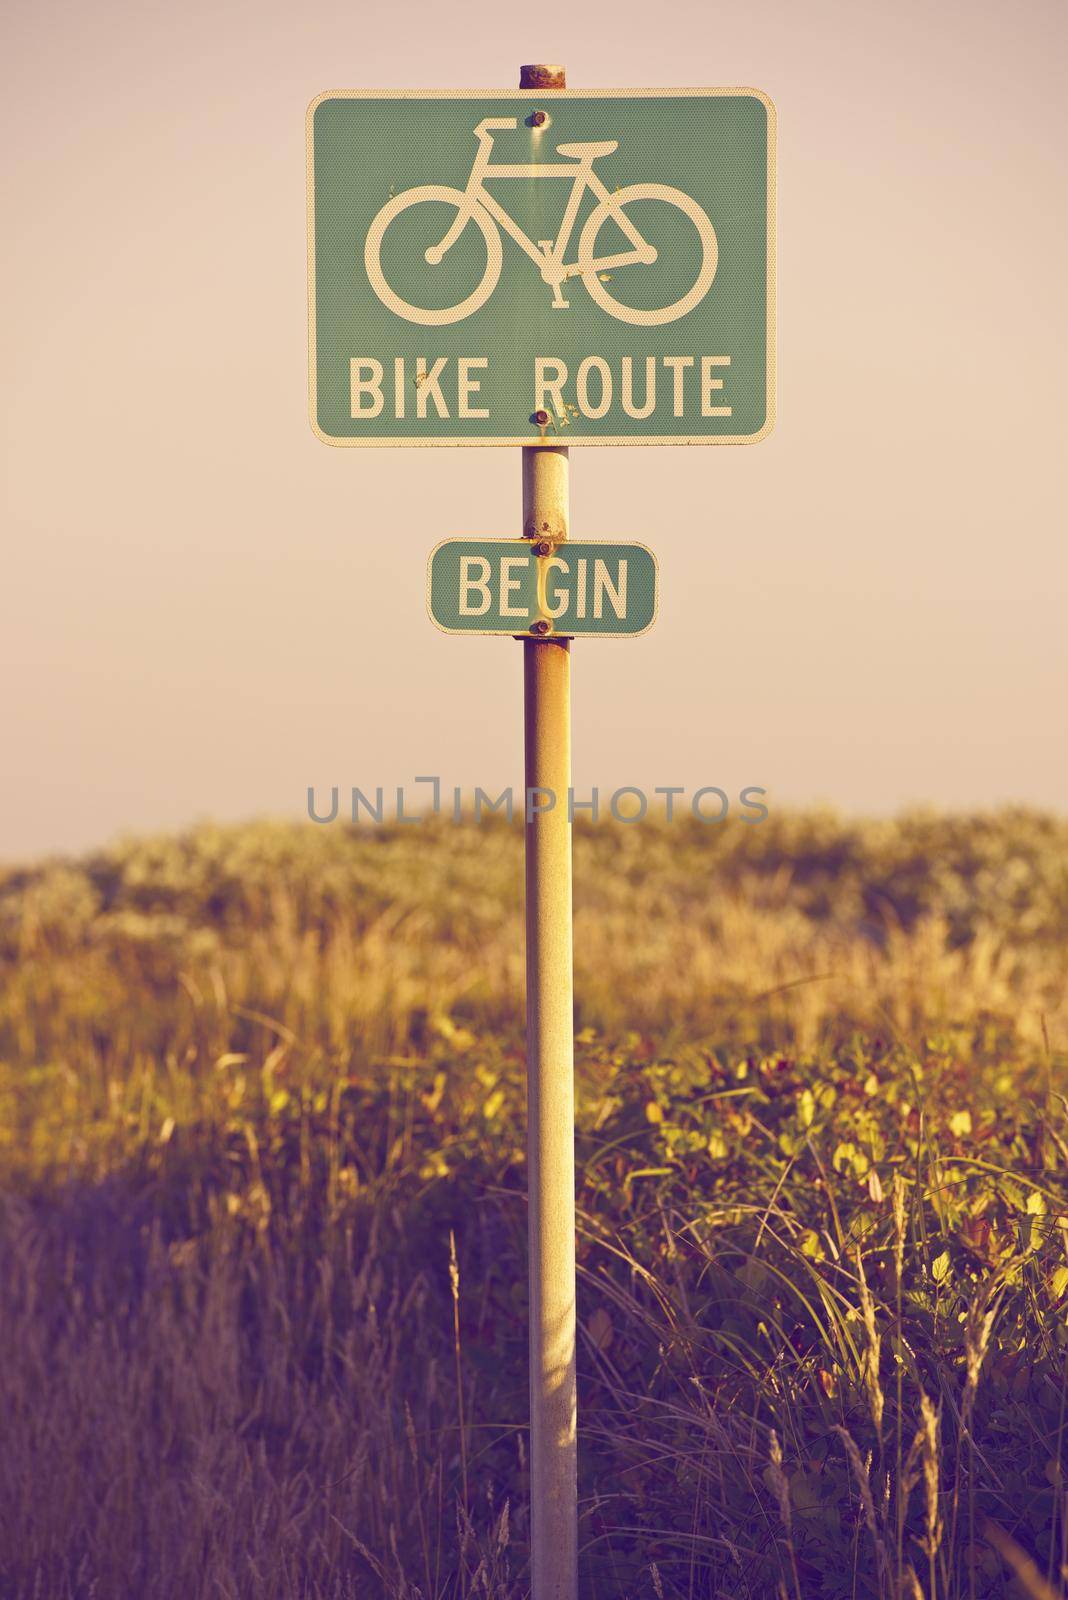 Bike Route Begin Traffic Sign in California, USA. Signage Photo Collection.